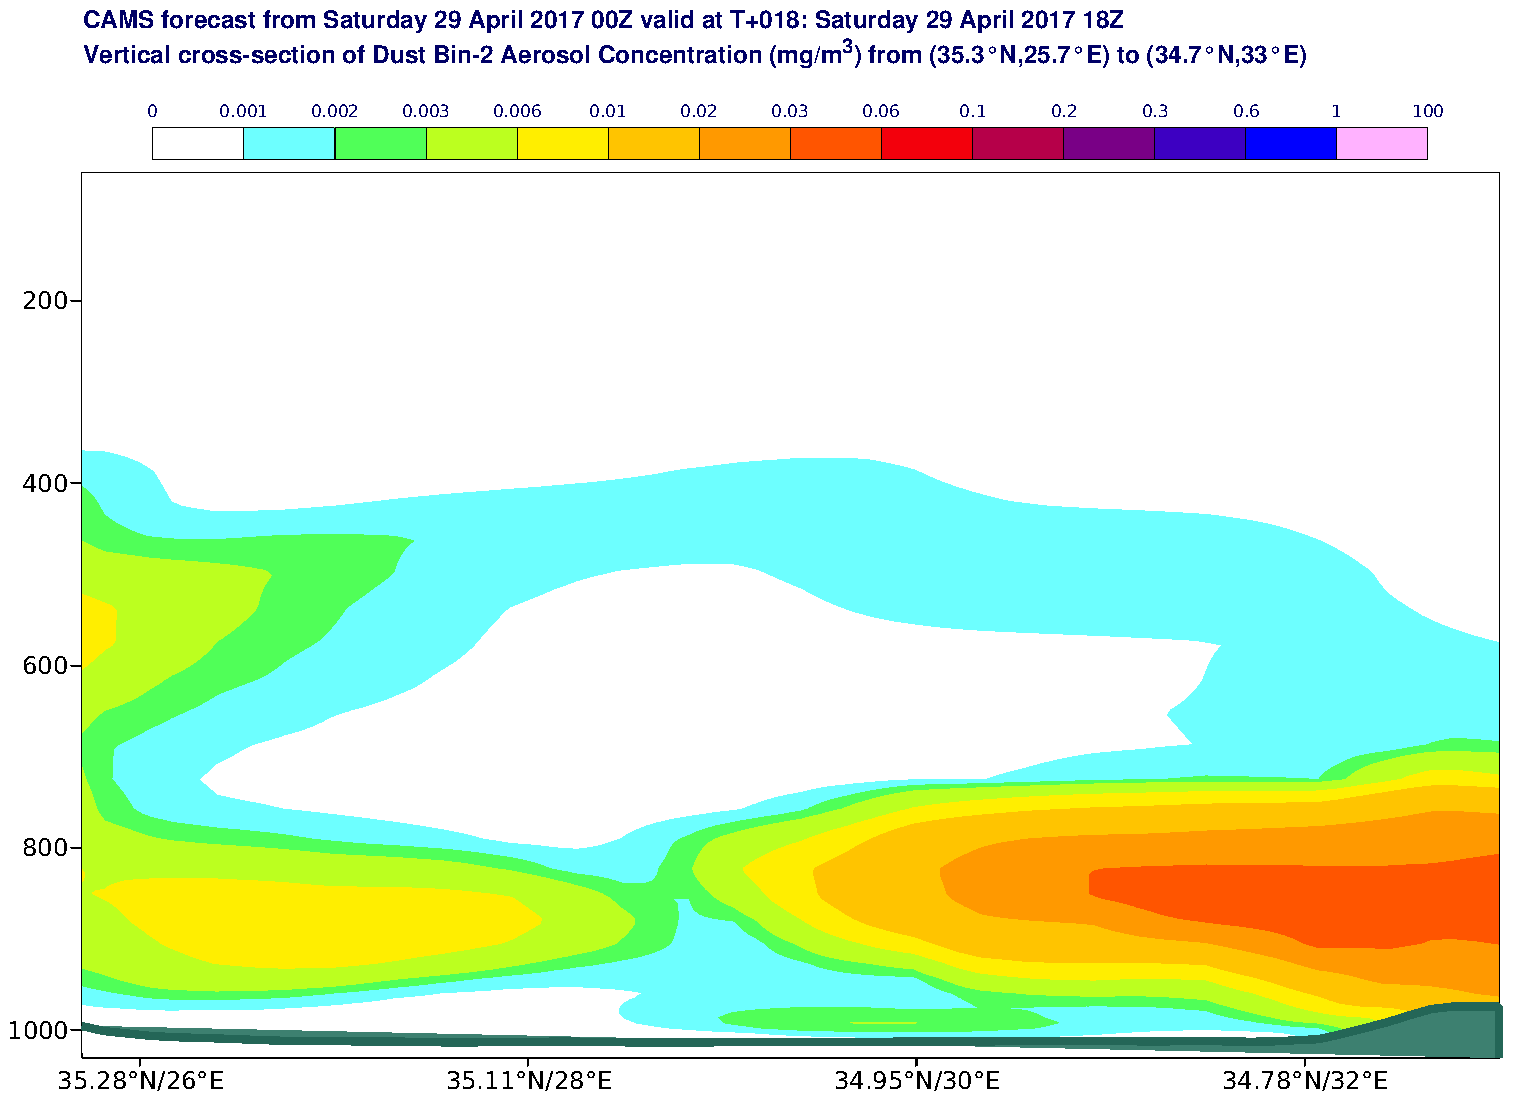 Vertical cross-section of Dust Bin-2 Aerosol Concentration (mg/m3) valid at T18 - 2017-04-29 18:00